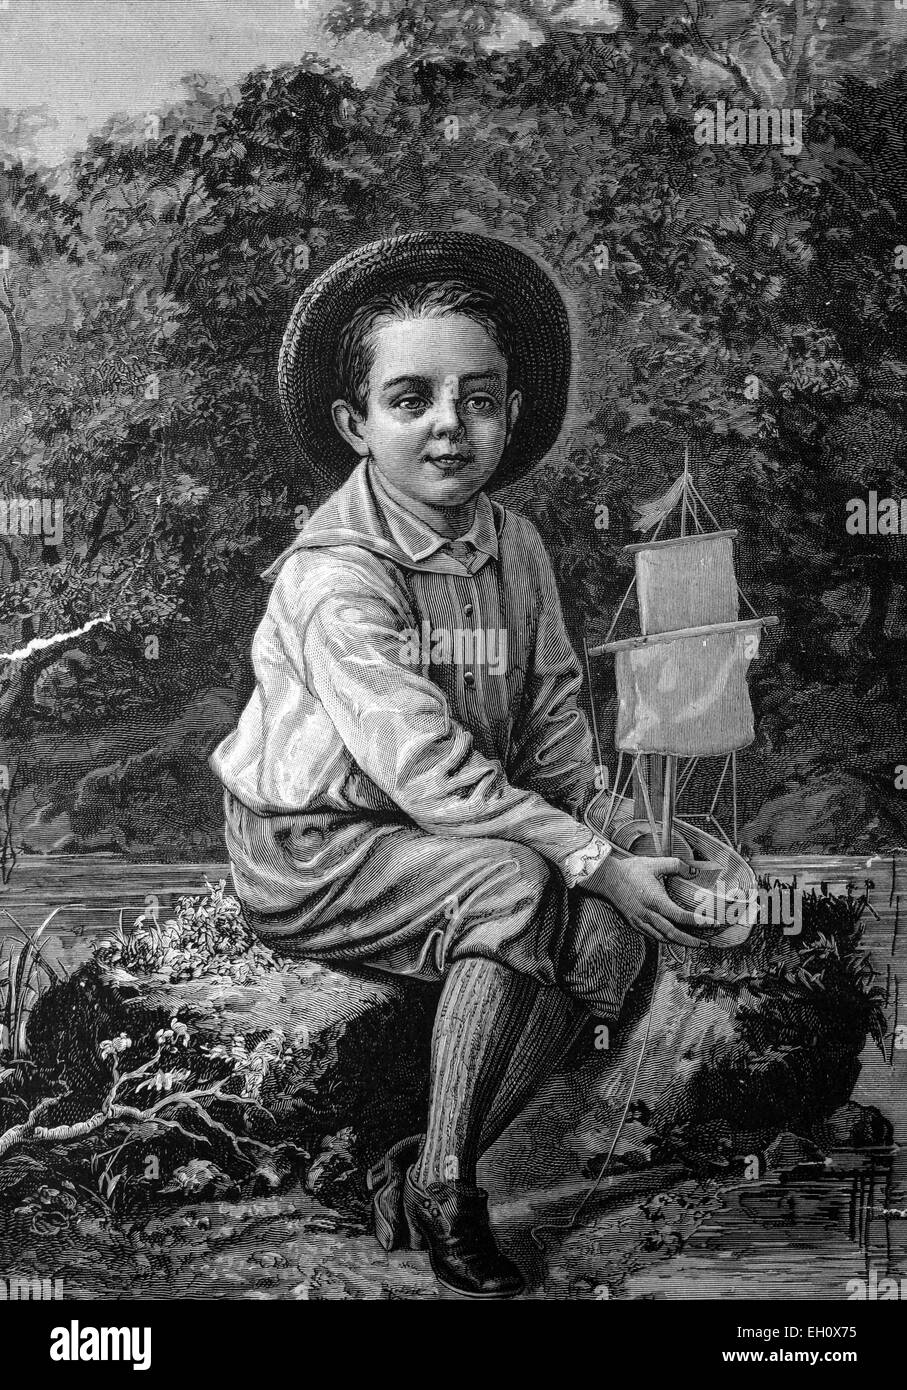 Child with a model ship, historical illustration, circa 1886 Stock Photo